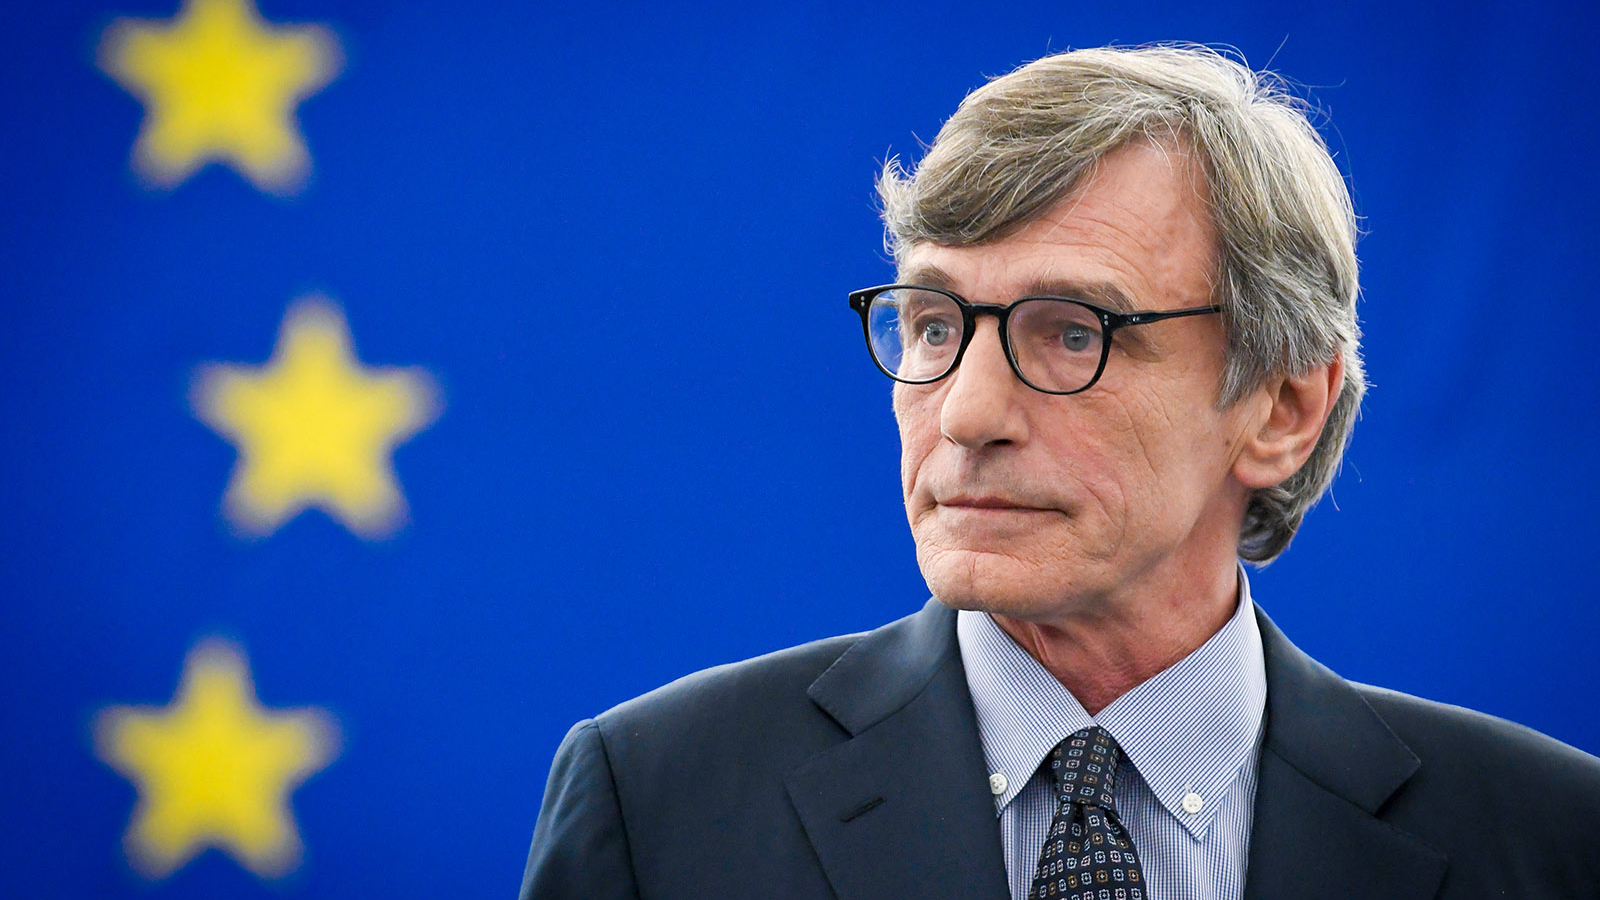 David Sassoli has been elected the new president of the European Parliament